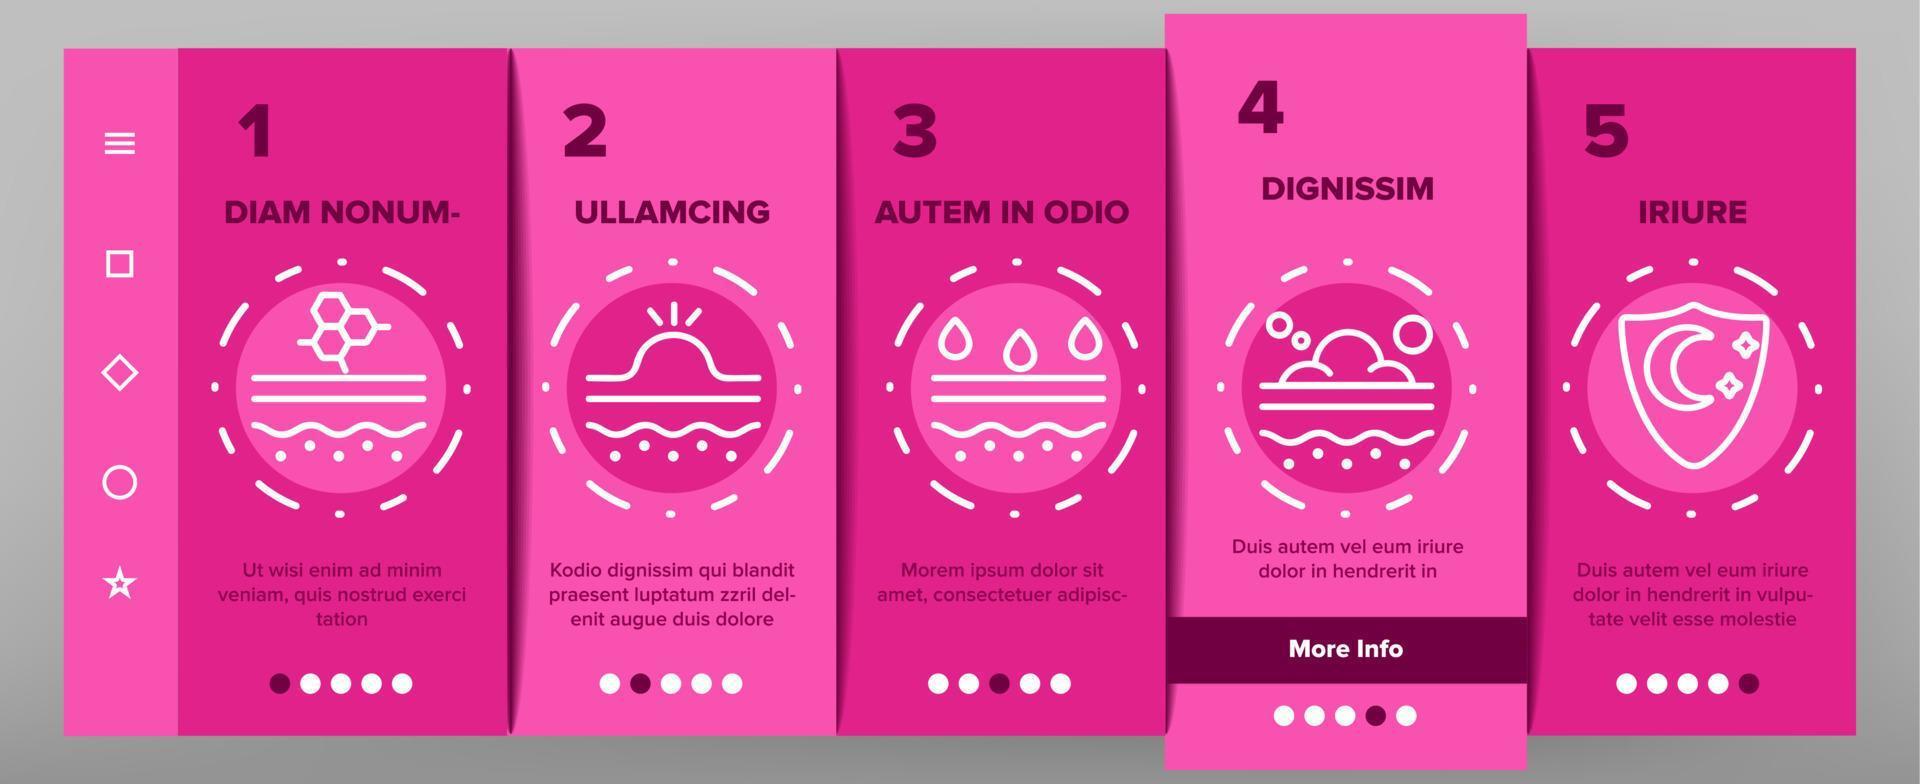 Skin Care Onboarding Icons Set Vector